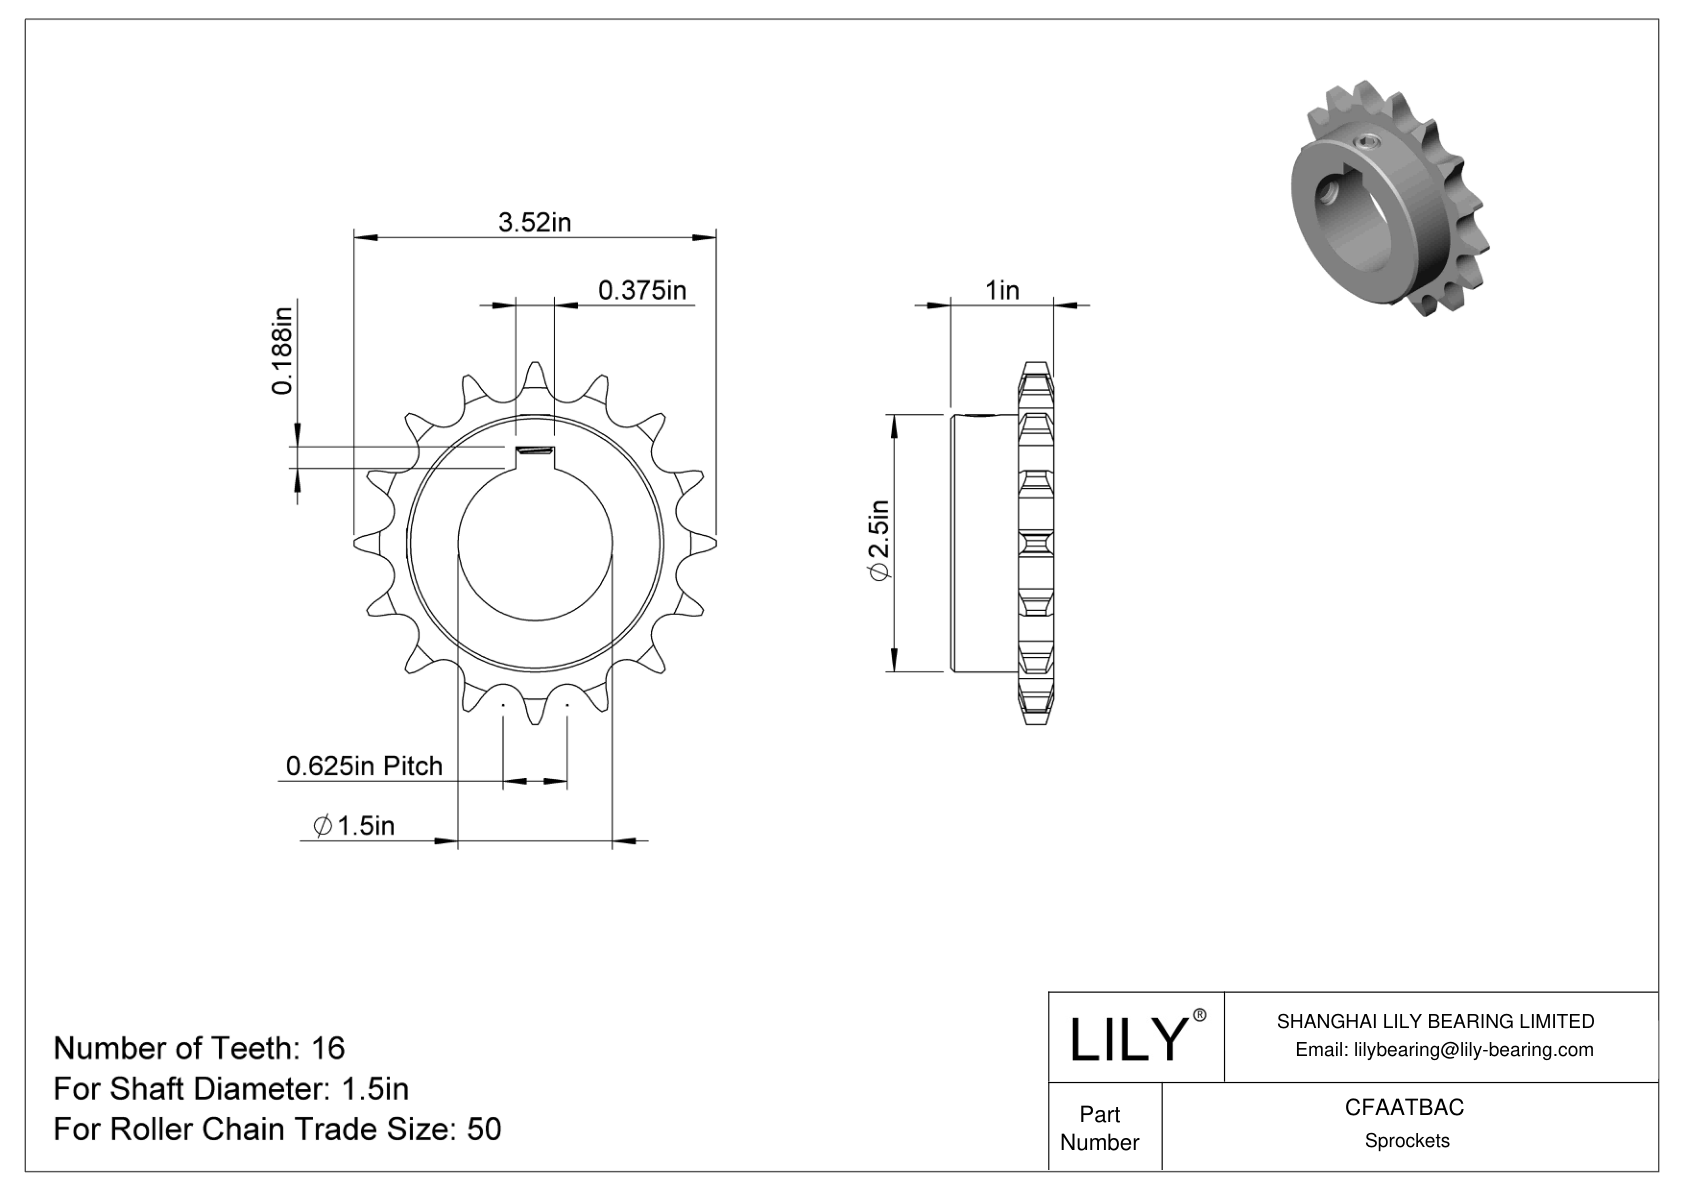 CFAATBAC Wear-Resistant Sprockets for ANSI Roller Chain cad drawing